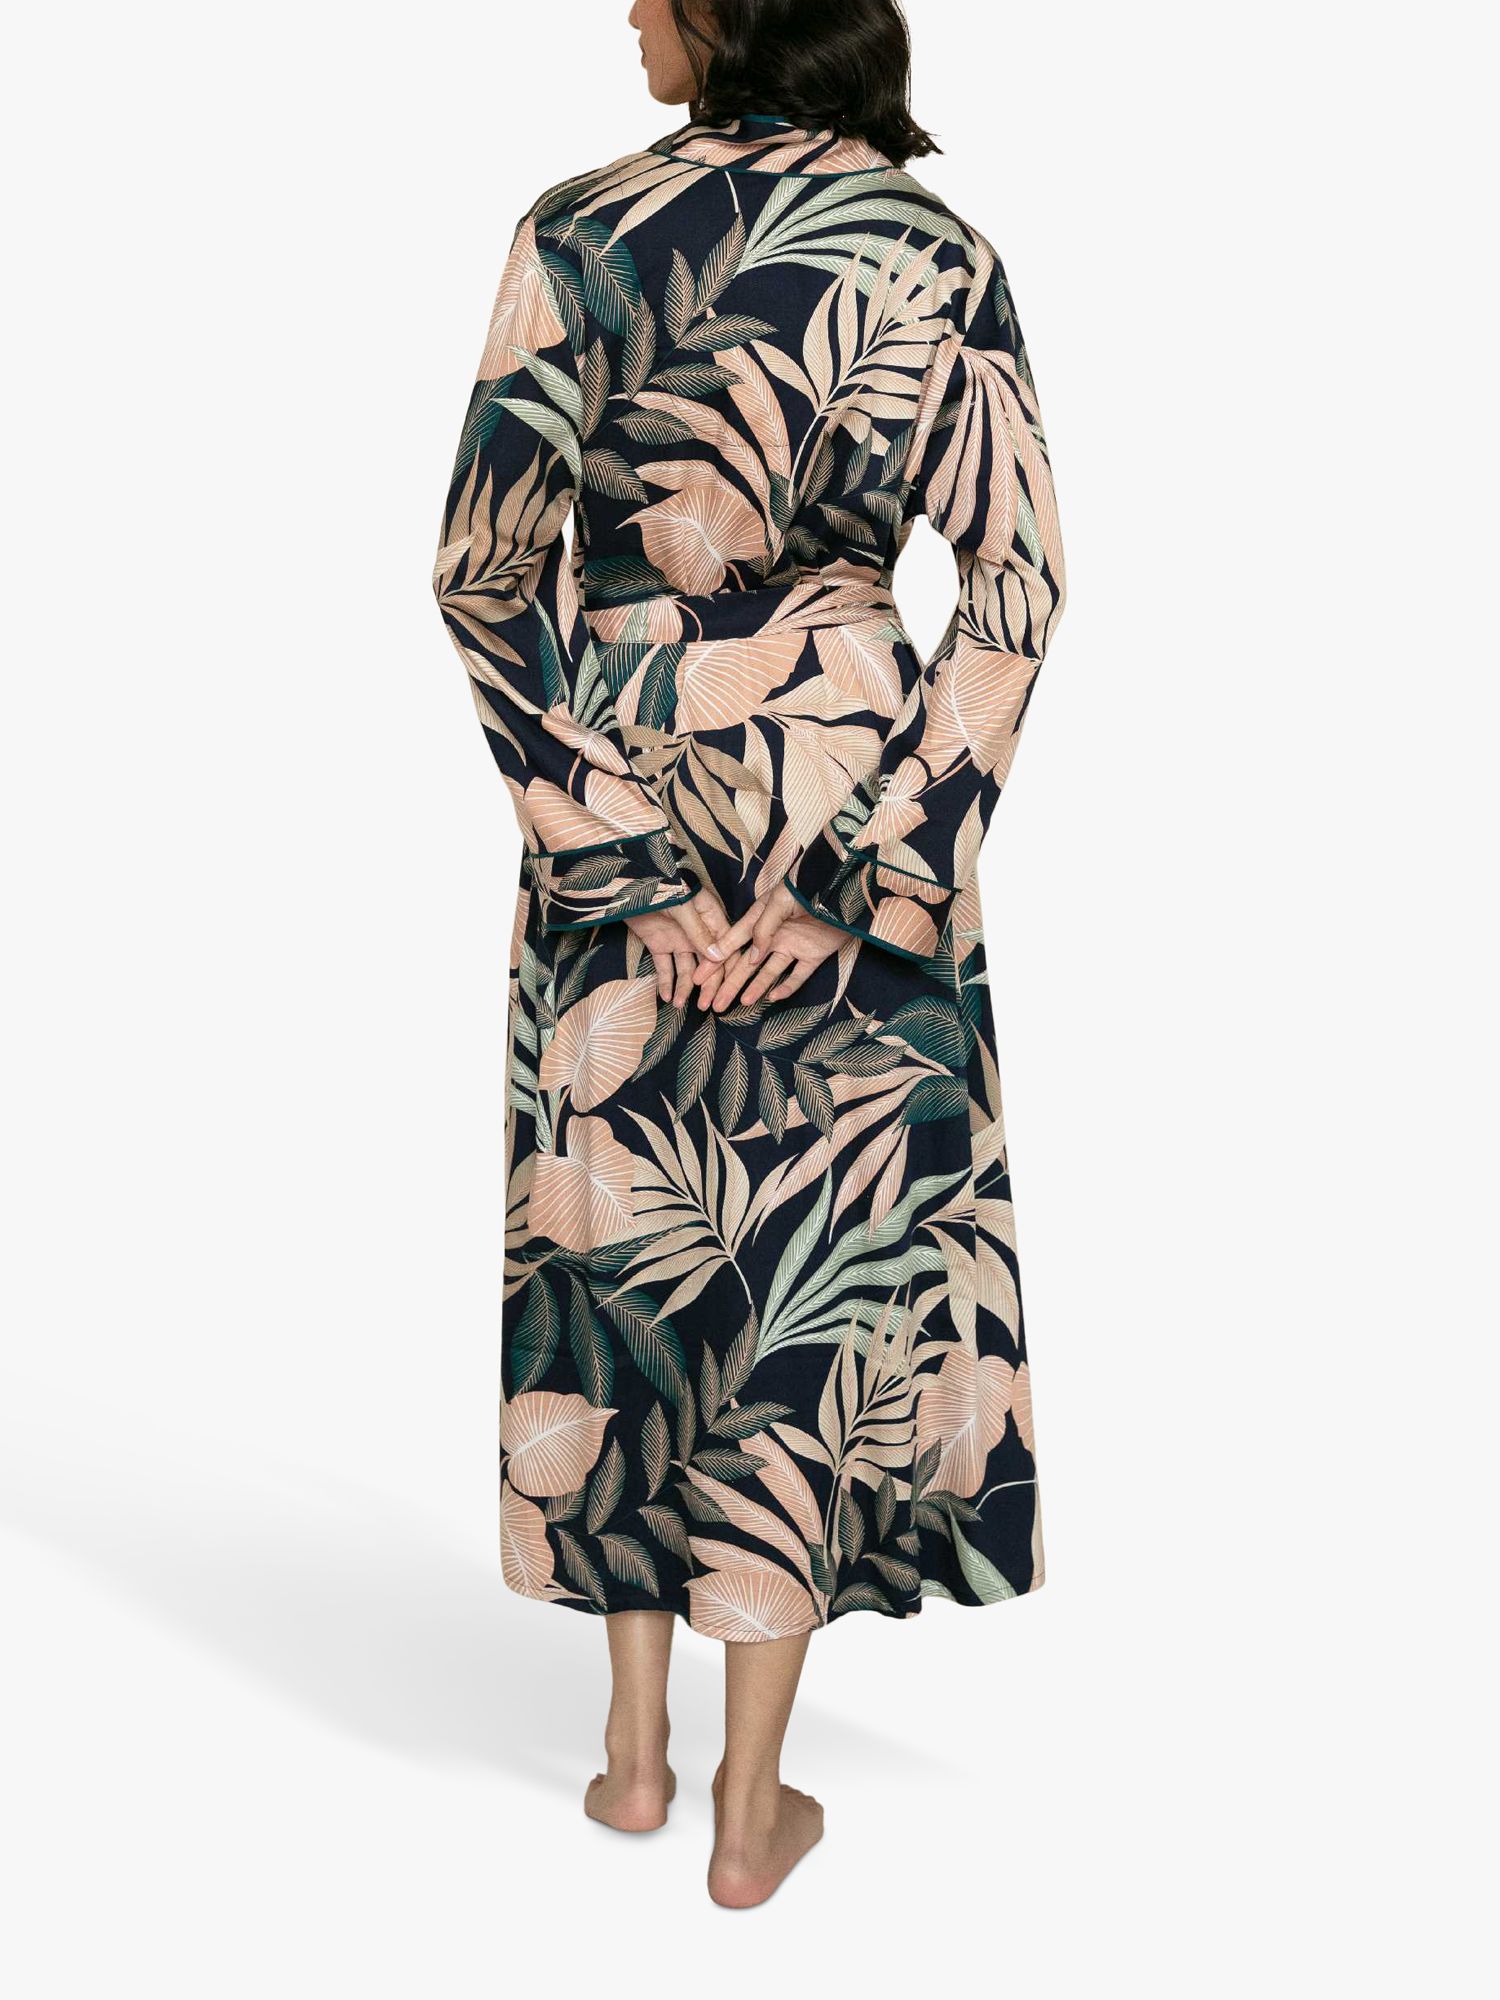 Fable & Eve Leaf Print Dressing Gown, Navy Mix at John Lewis & Partners